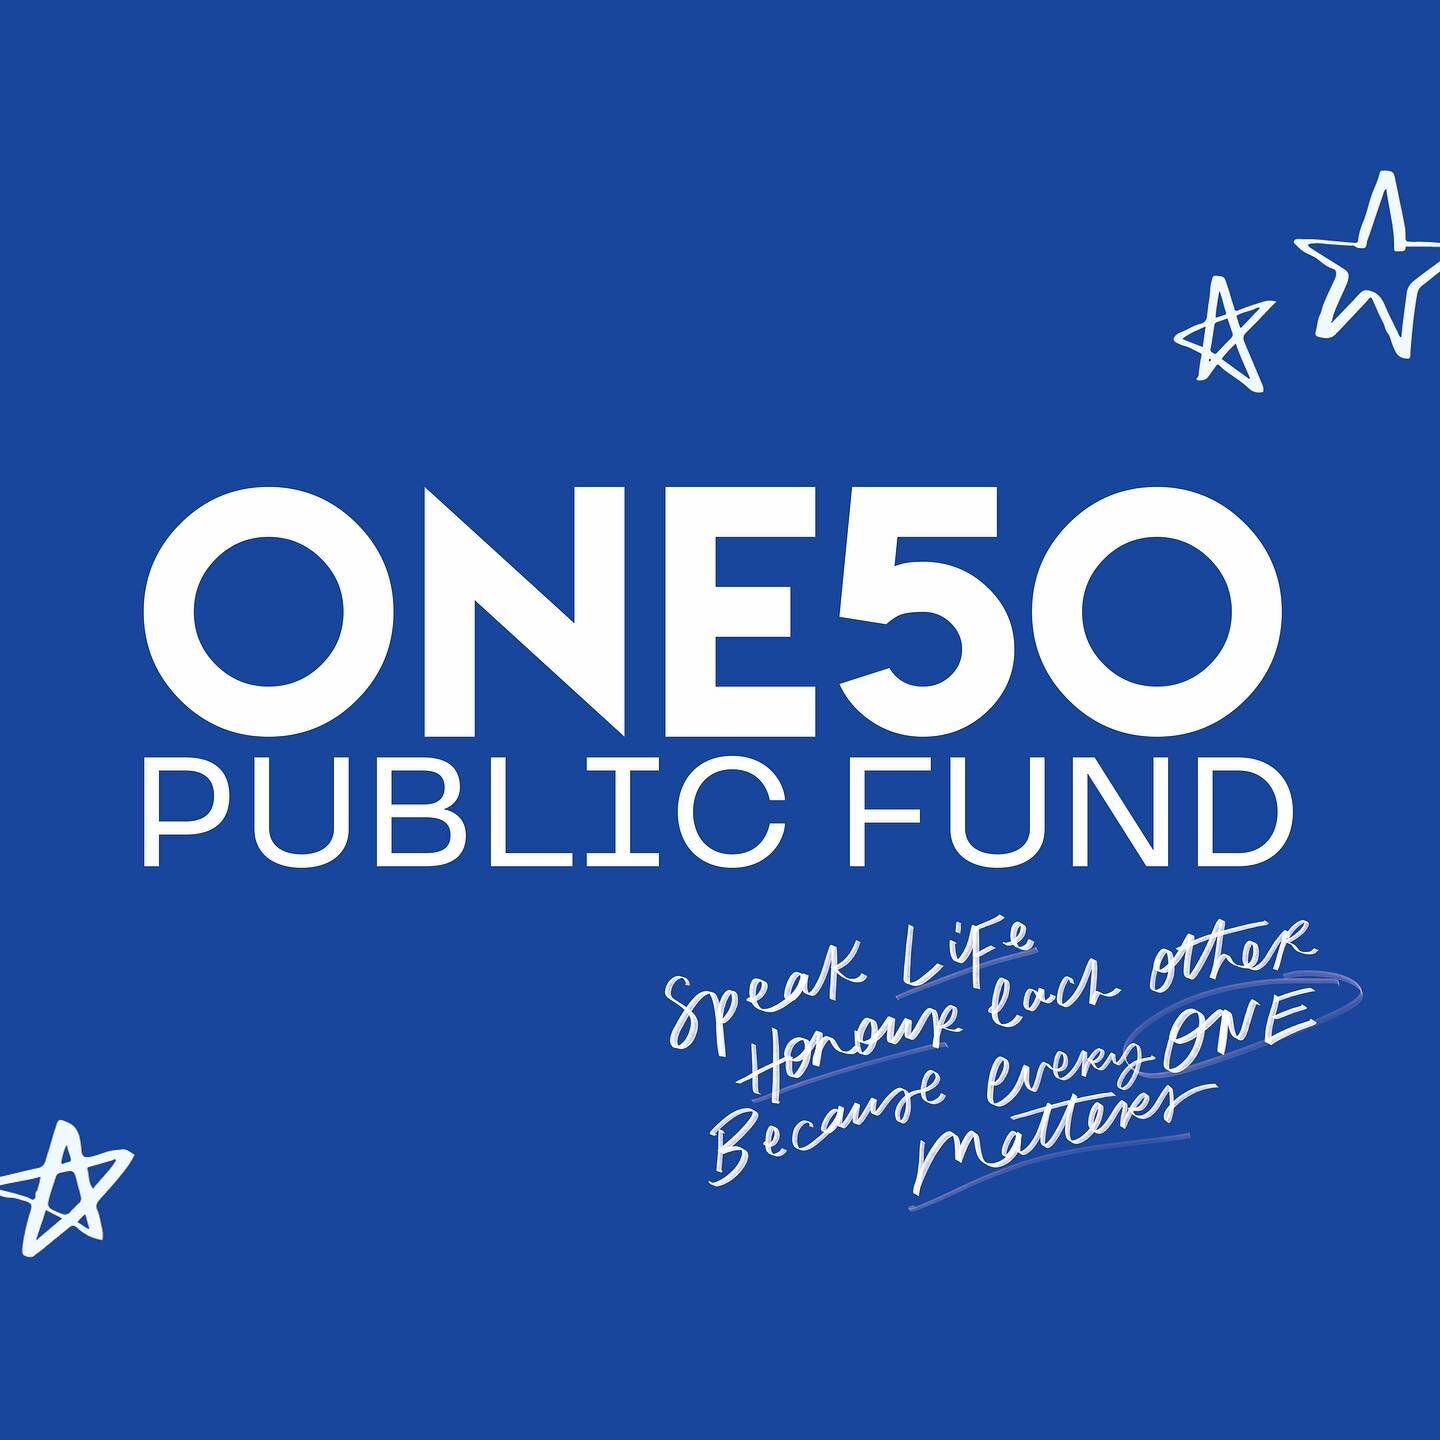 On Thursday 27th April we officially launched the One50 Public Fund.
We are incredibly excited about this initiative, which has been four years in the making.

Our vision is to empower young 
people through dance. The One50 Public Fund exists to furt